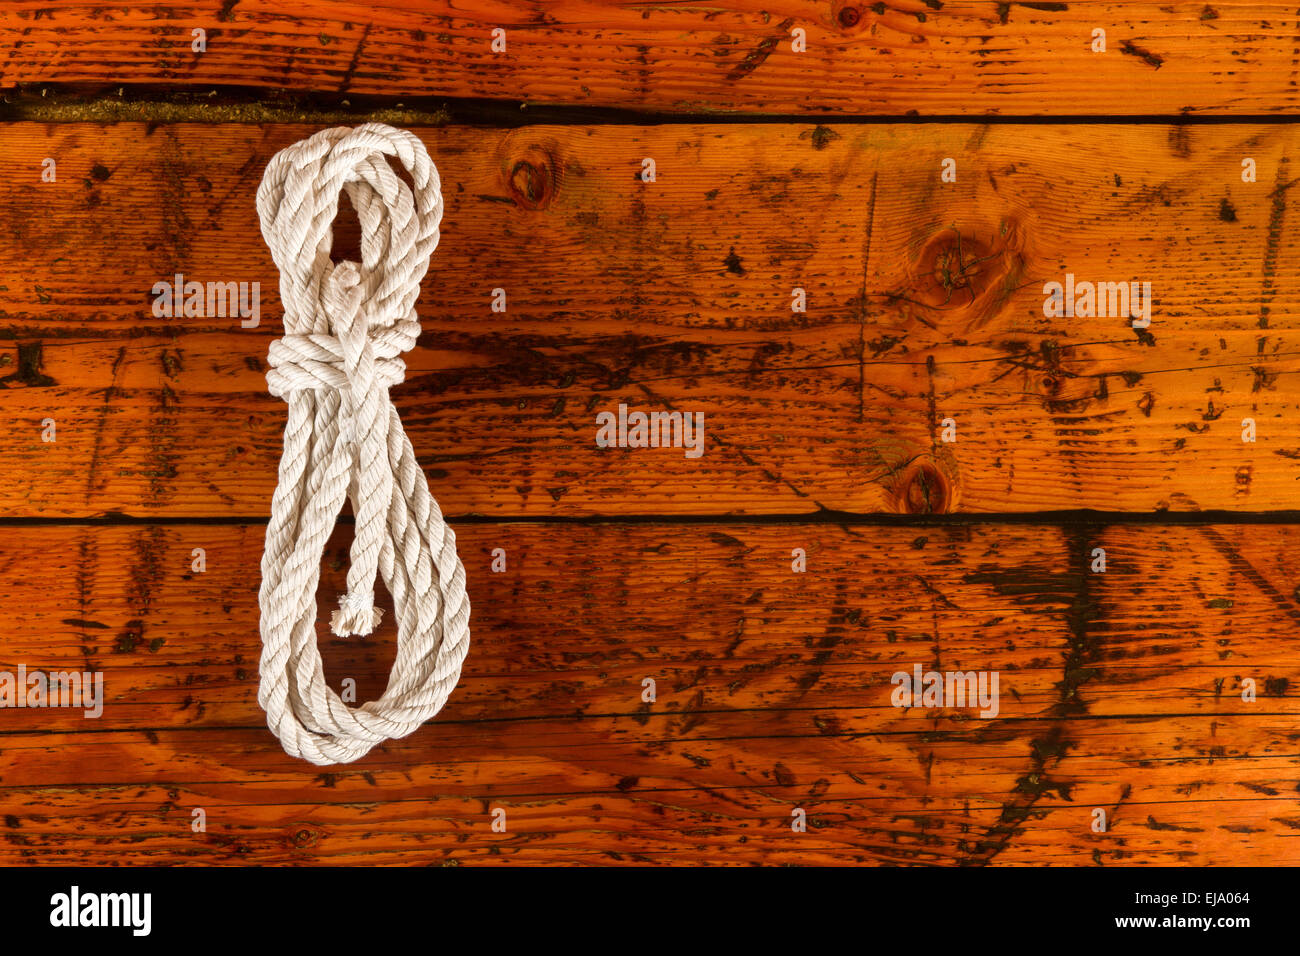 Coil of white rope on highly textured wood.  Copy space to right. Stock Photo